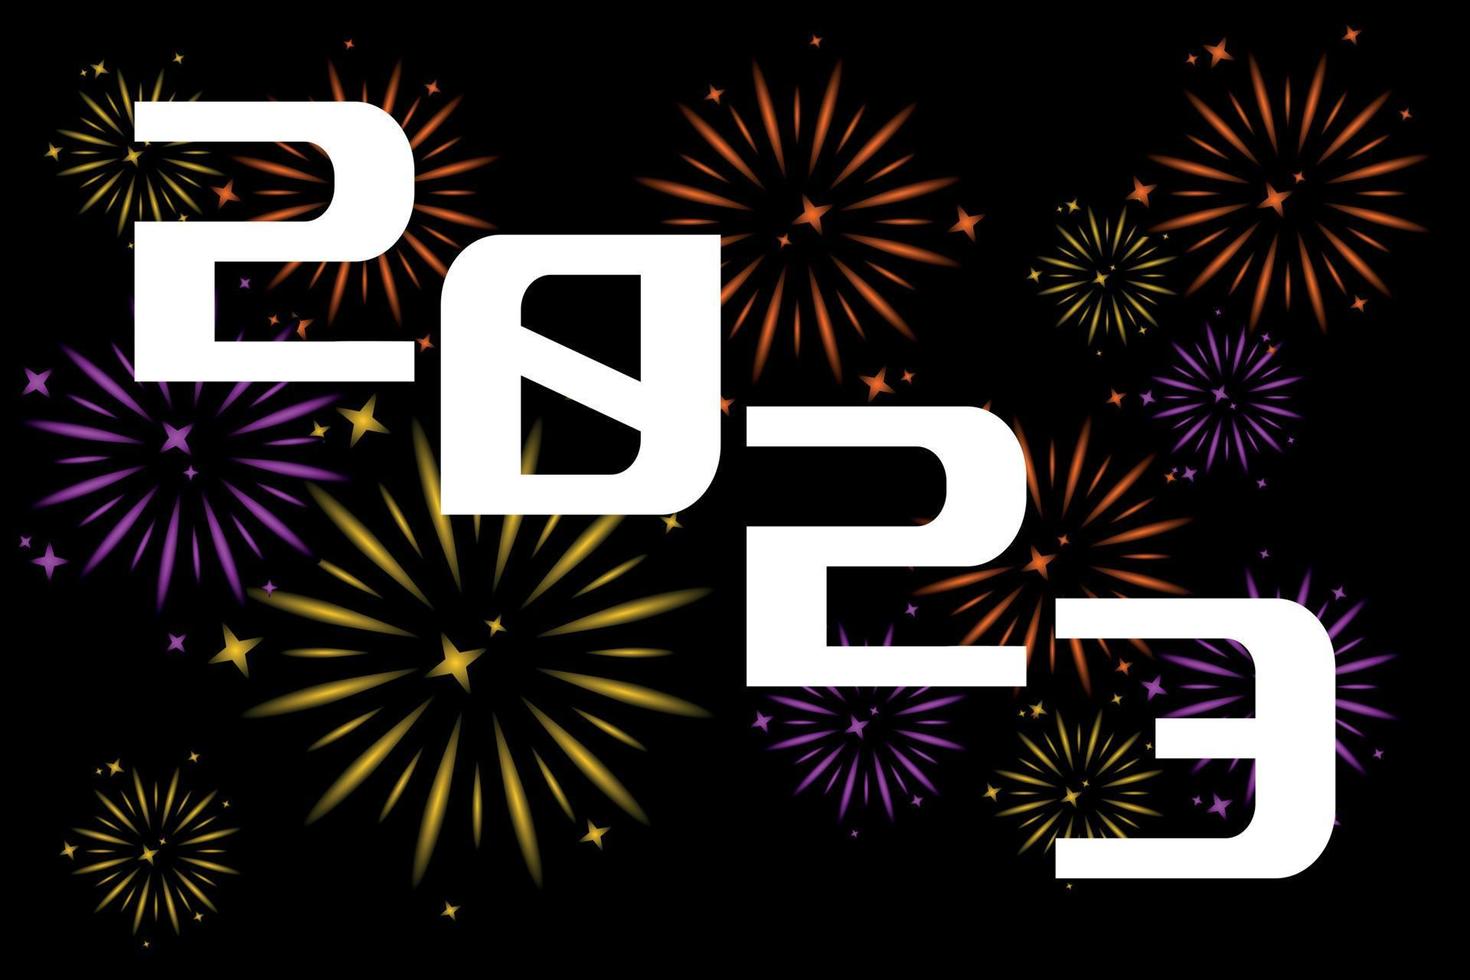 2023 Greeting, Happy New Year banner vector